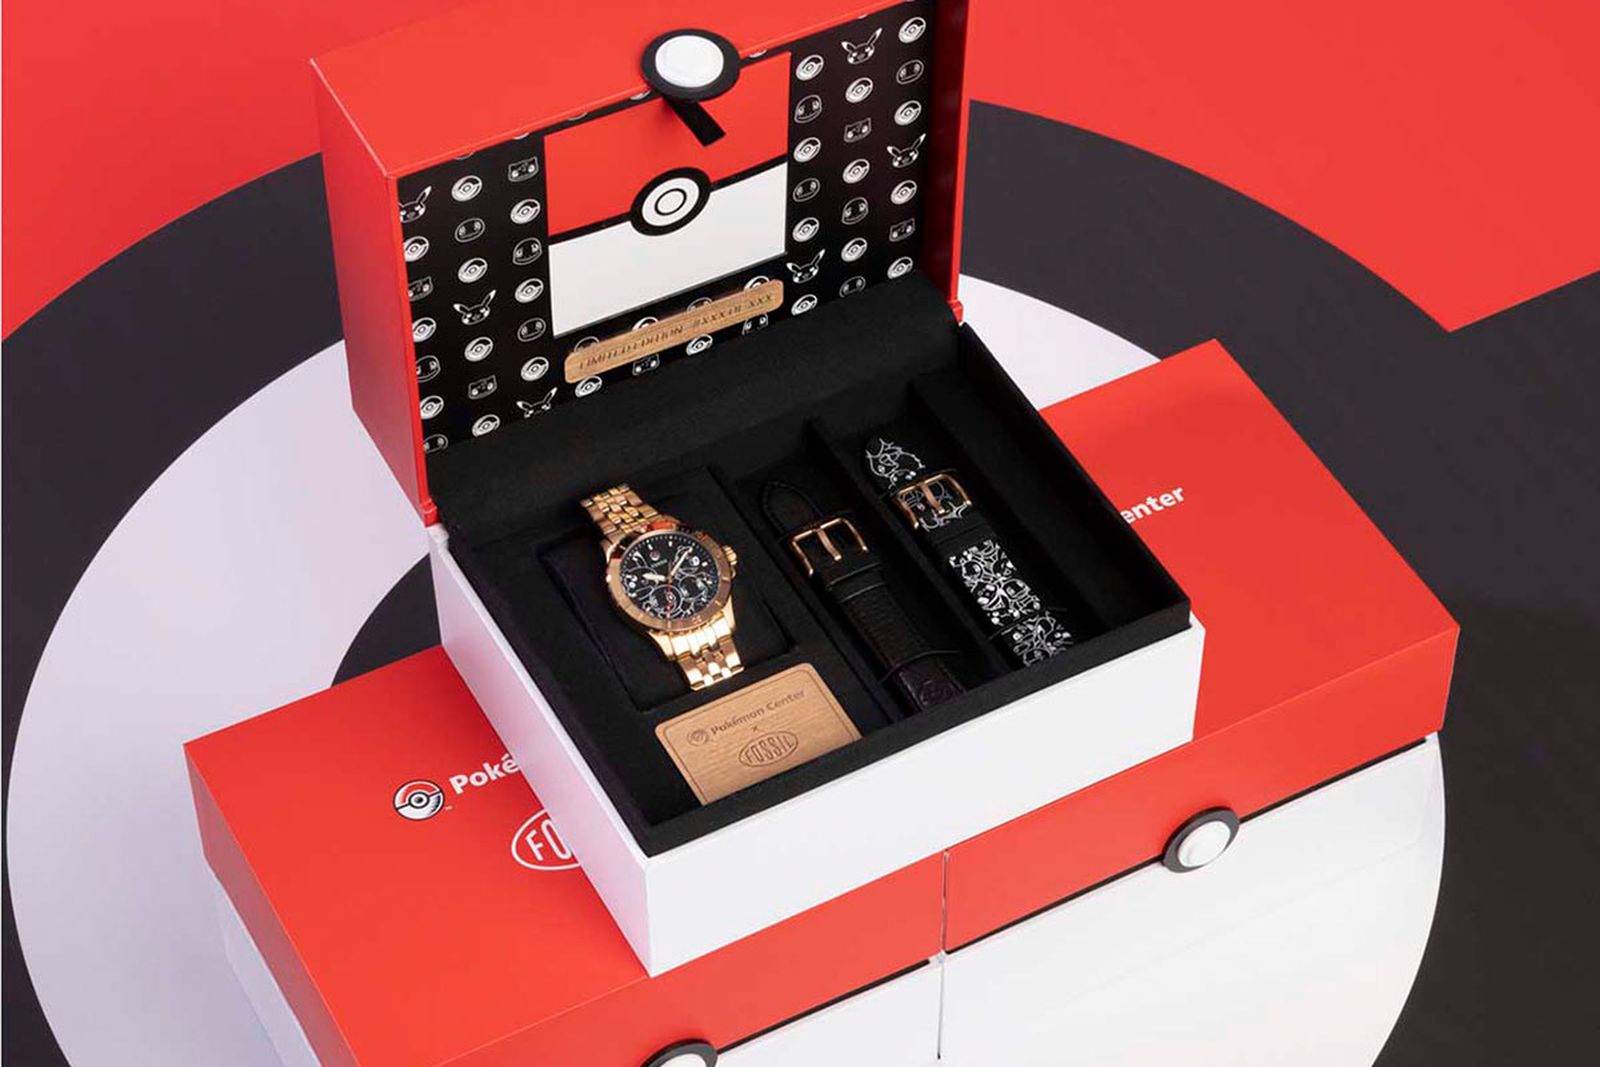 Fossil Bags, Watches, & Accessories Get a Pokémon Makeover